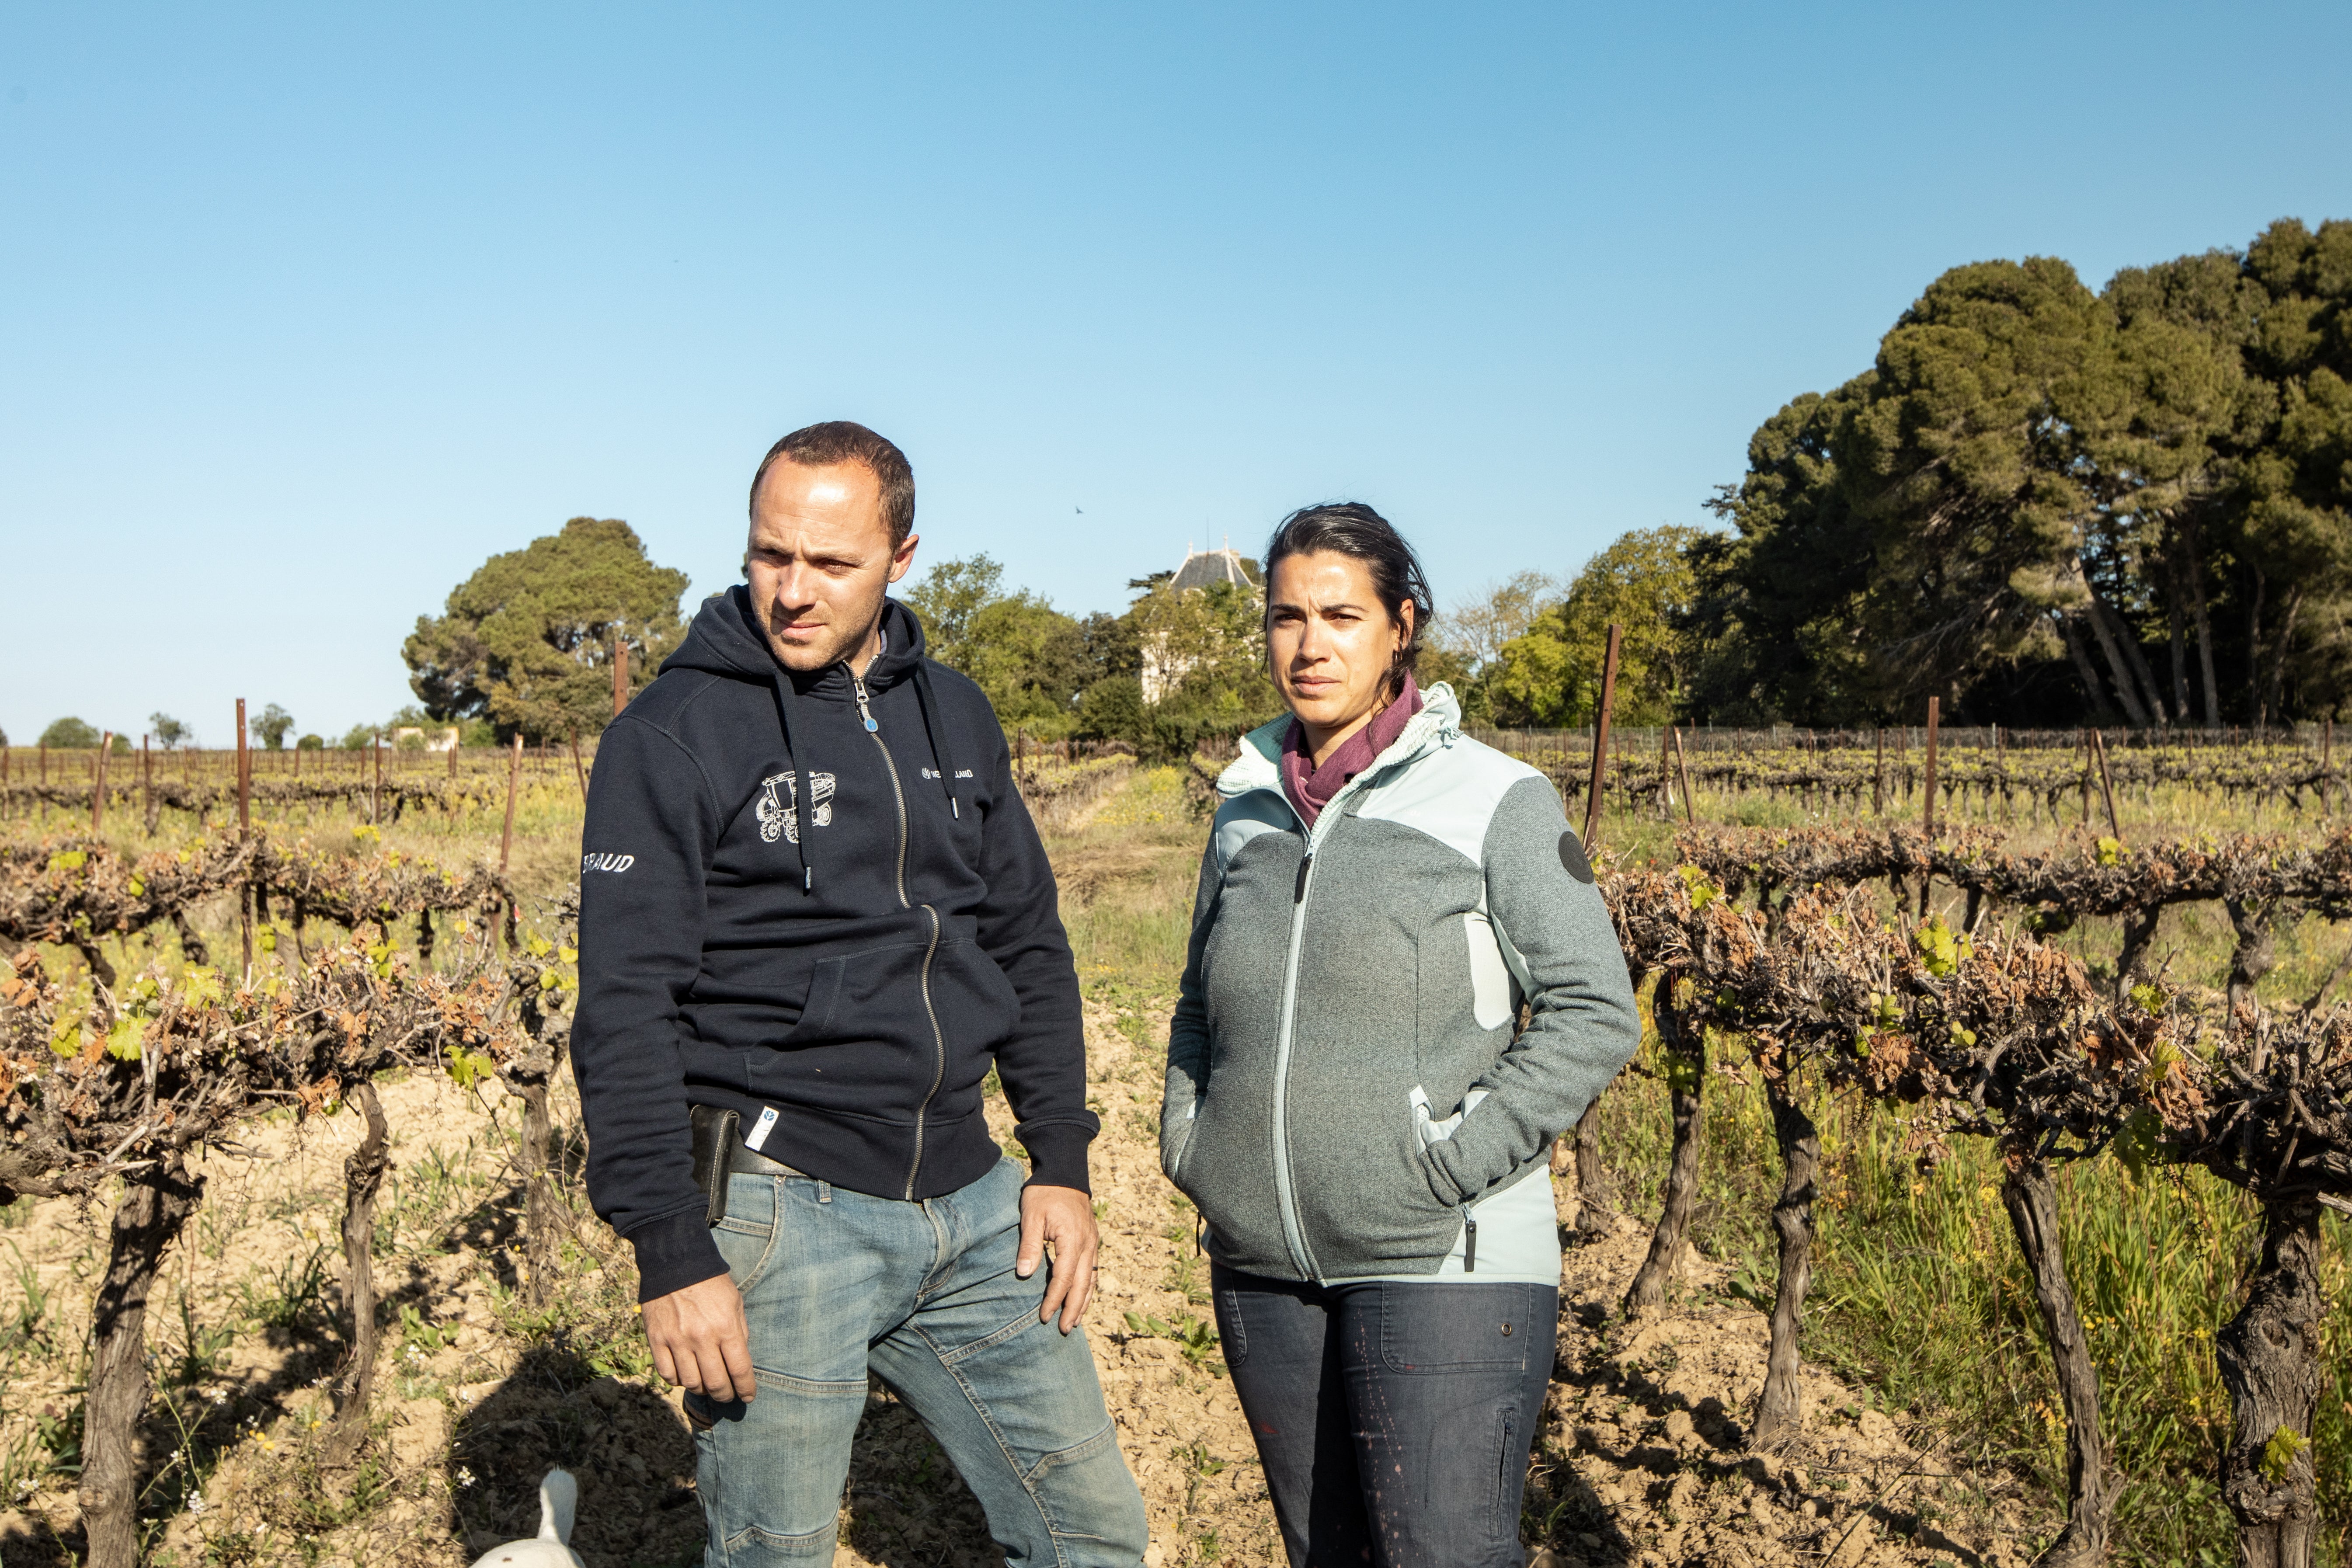 Emilie Faucheron and her husband put all their ‘passion’ into devastated vineyard